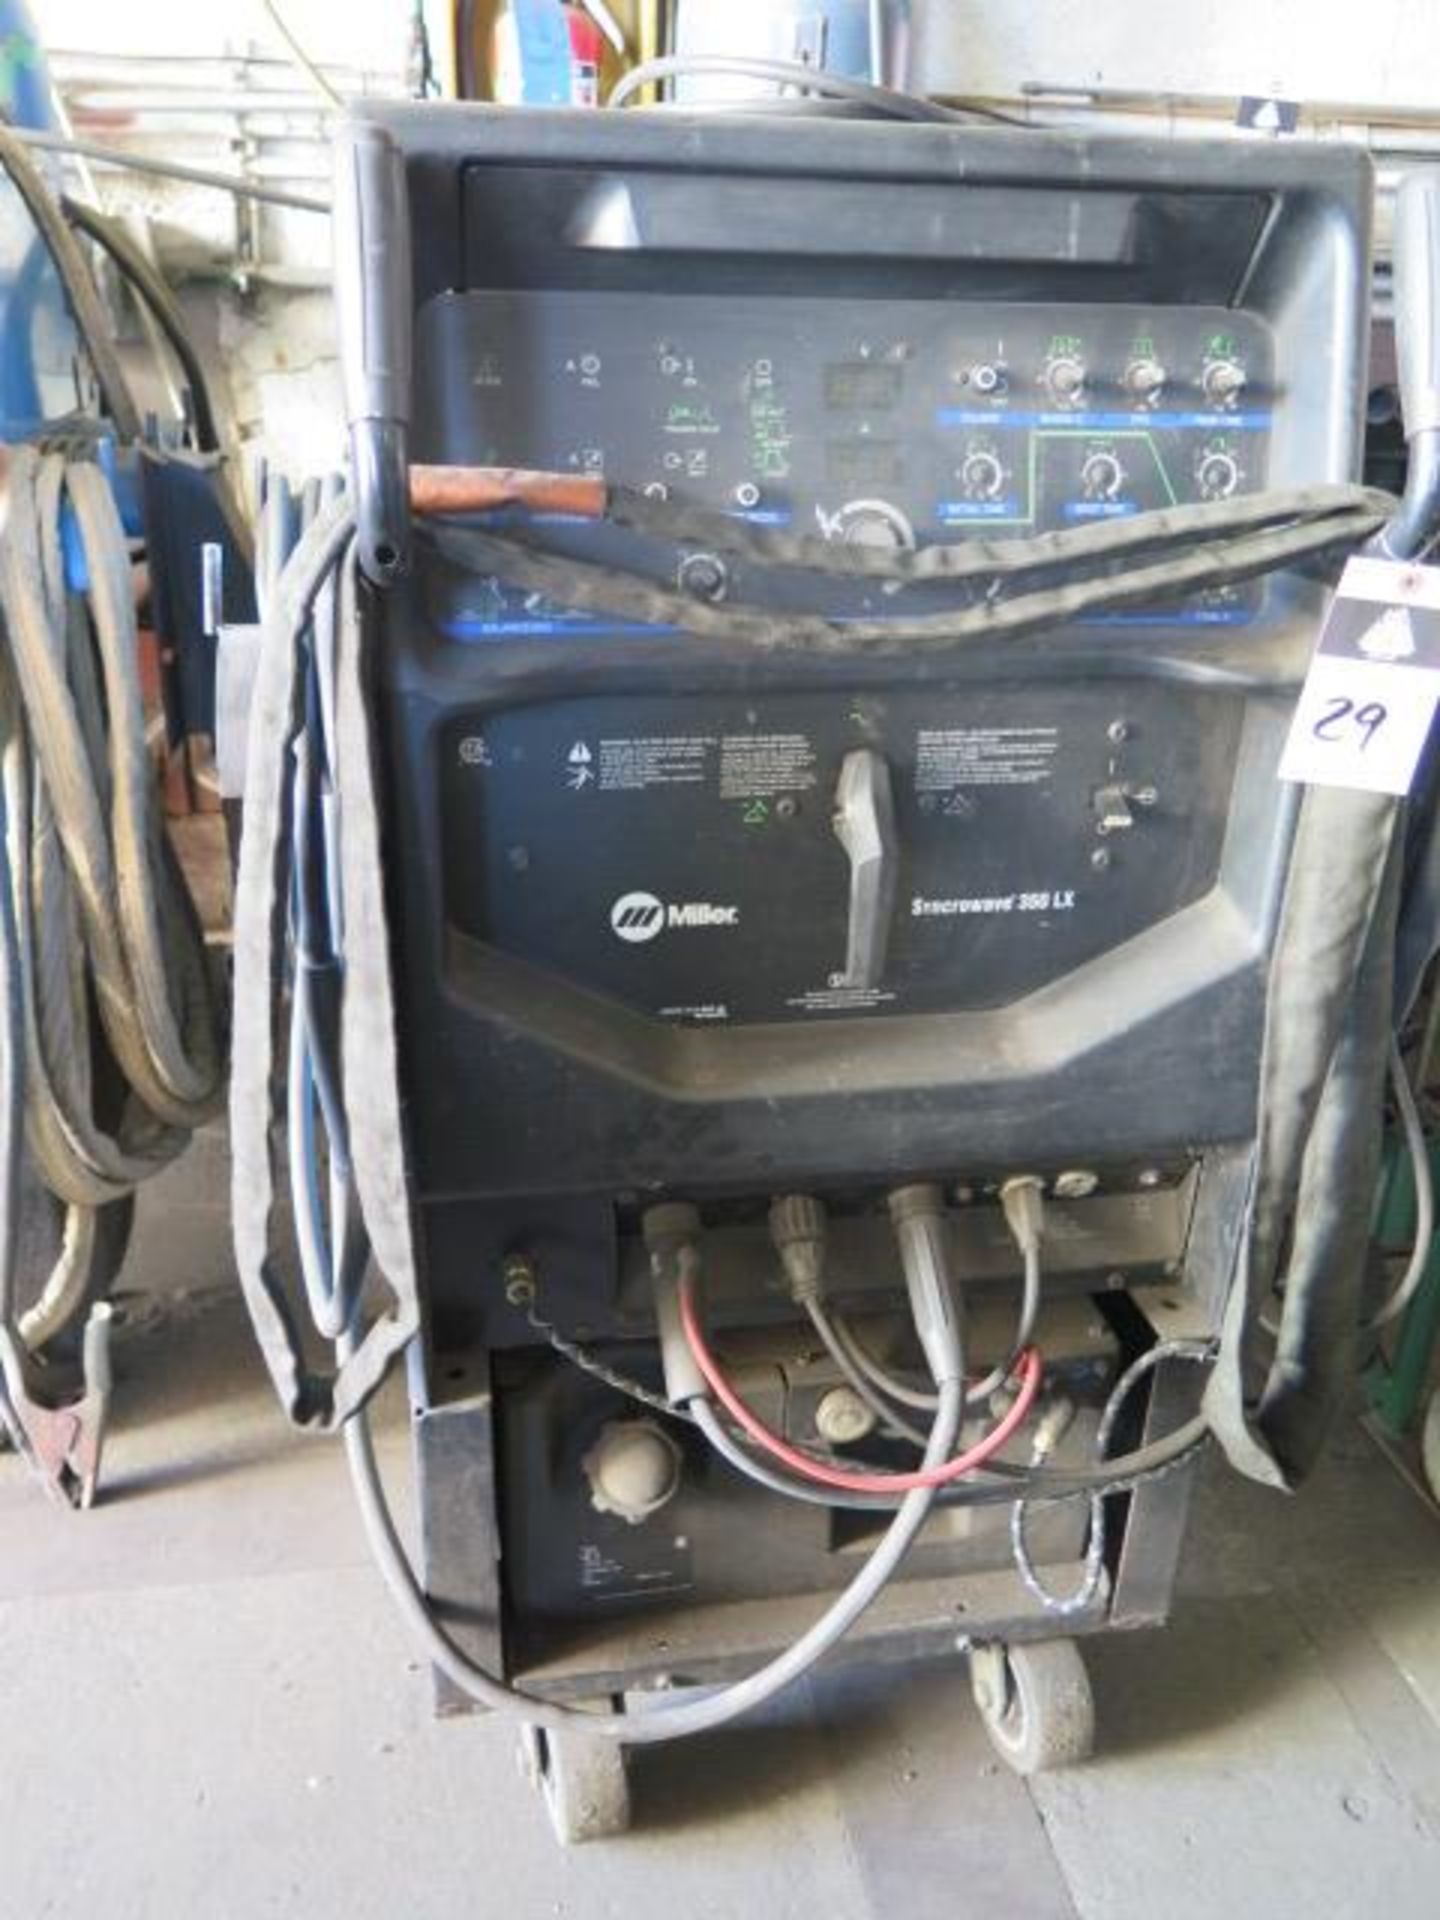 Miller Syncrowave 350LX Arc Welding Power Source s/n LH260315L w/ Cooler Cart (NO TANK) (SOLD AS-IS - Image 3 of 10